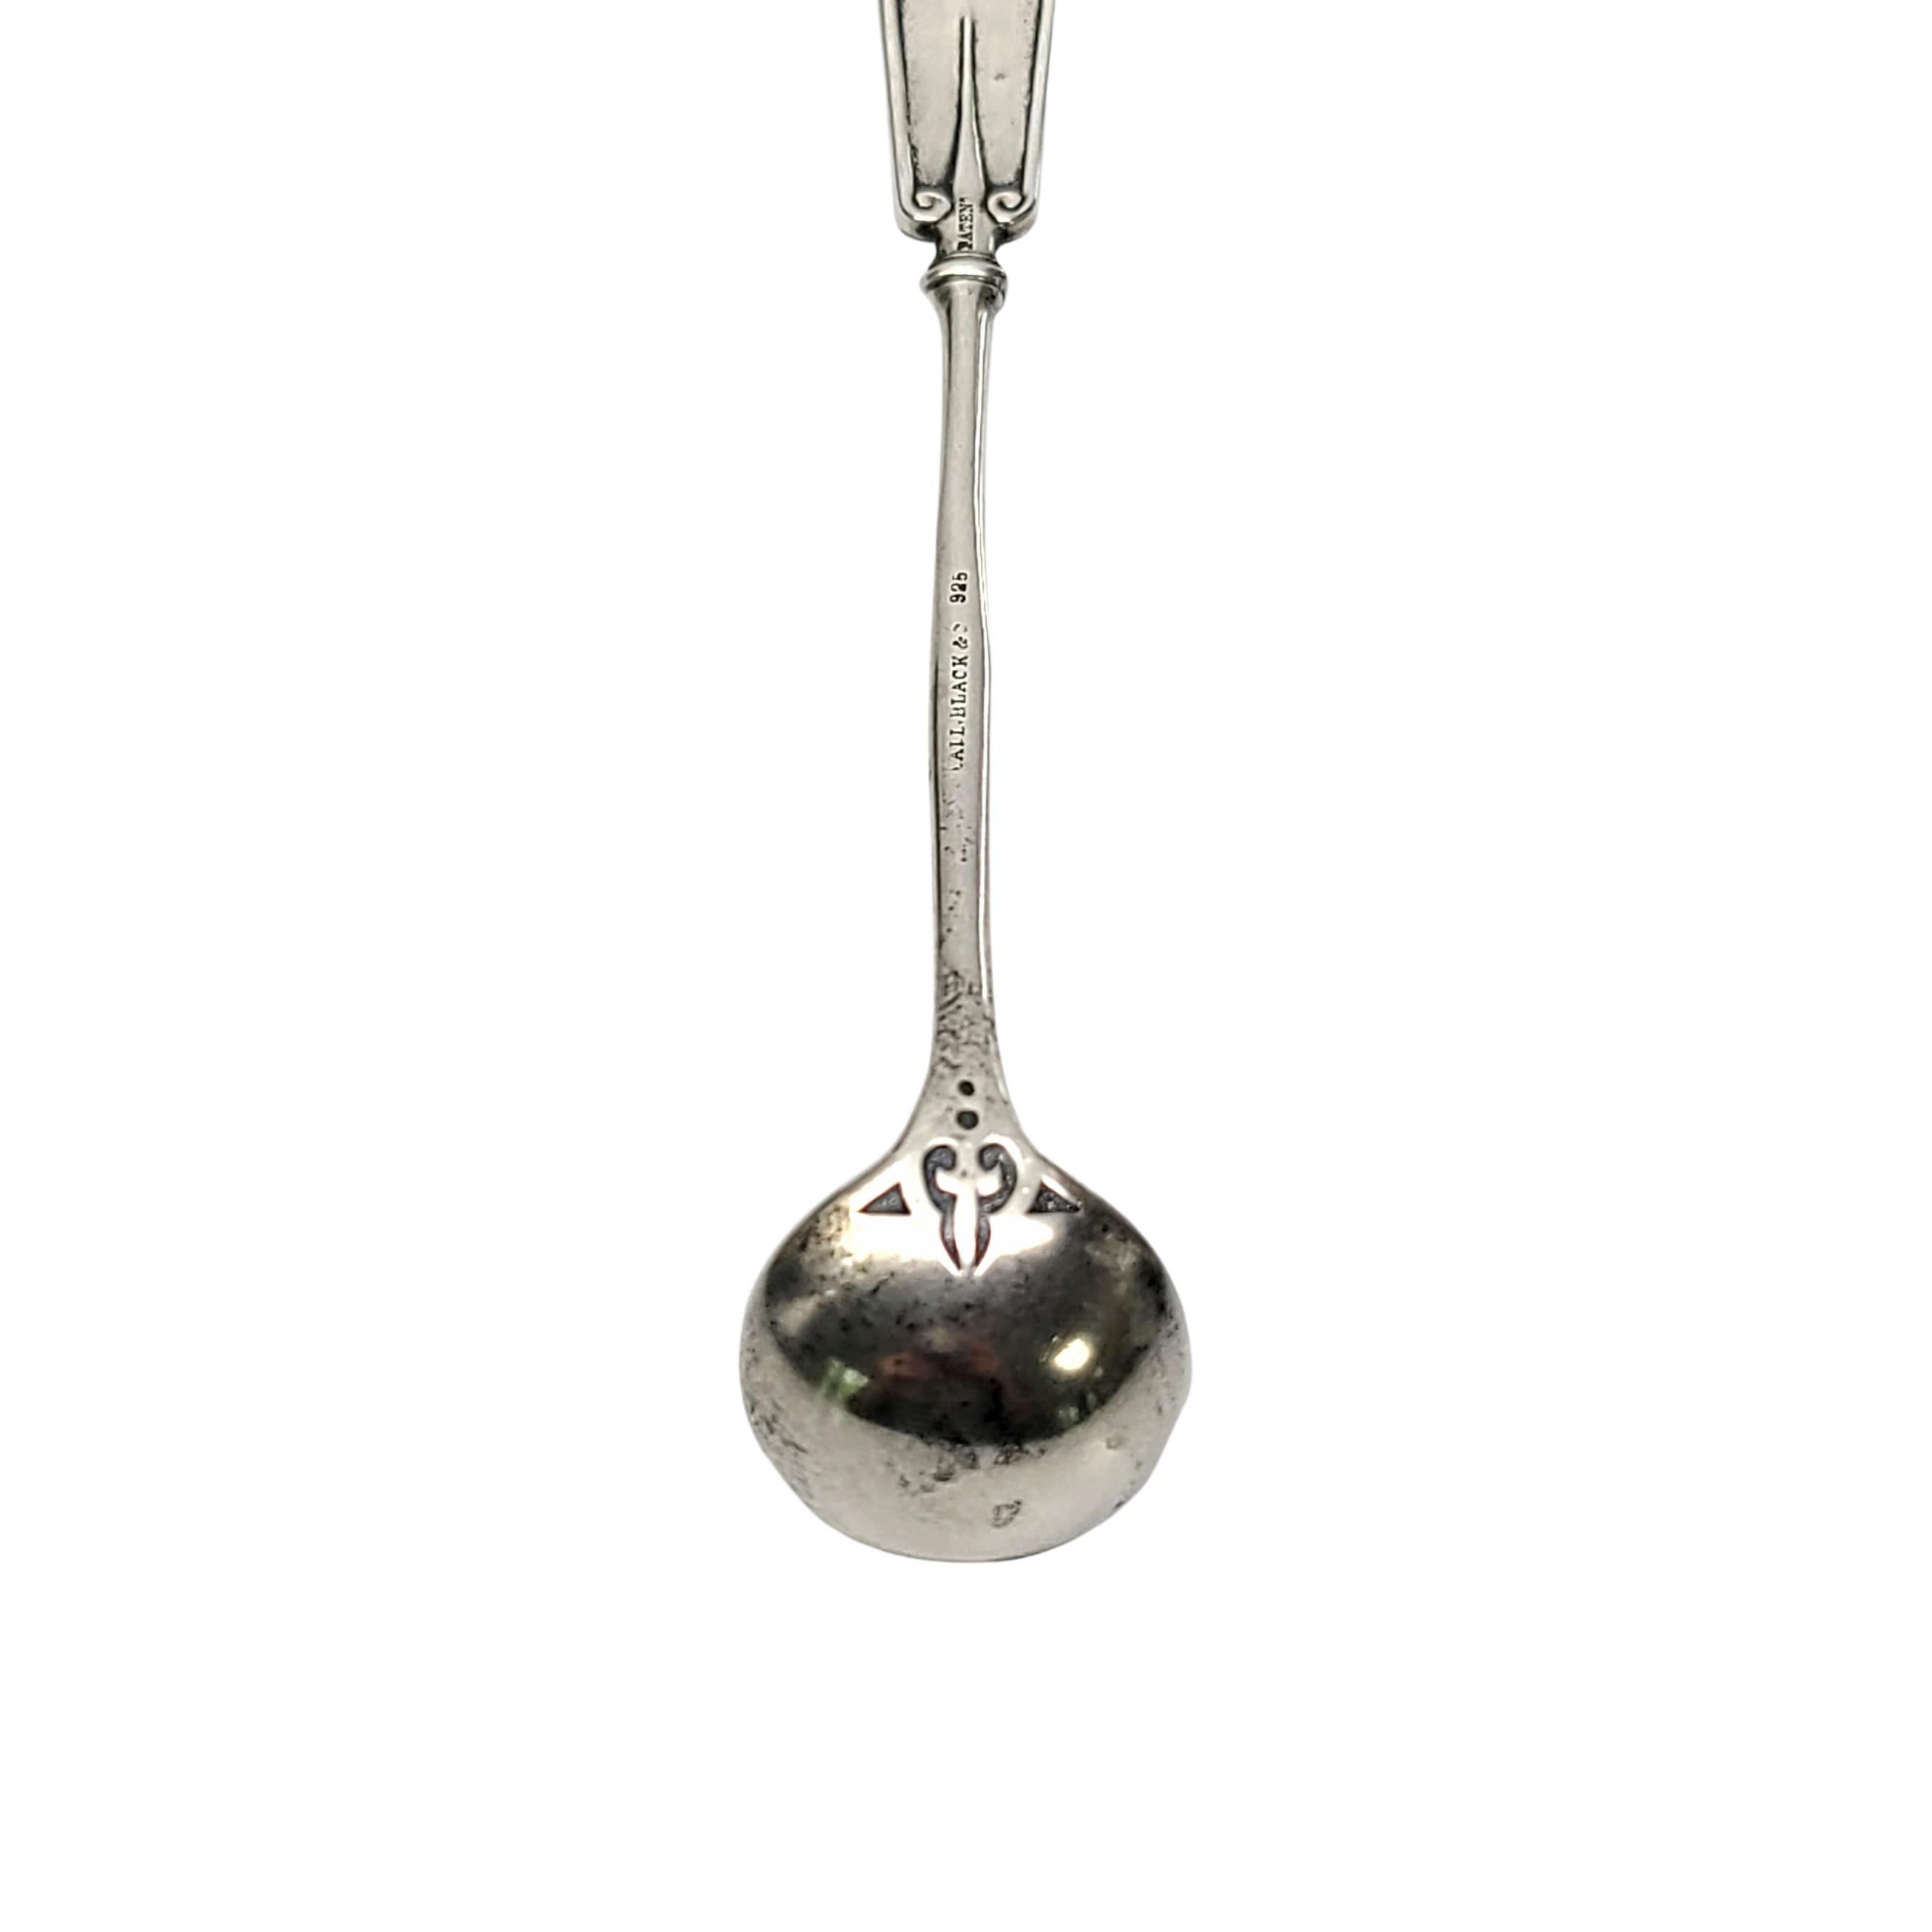 John Wendt for Ball Black & Co Sterling Silver Arabesque Mustard Ladle with Mono For Sale 3